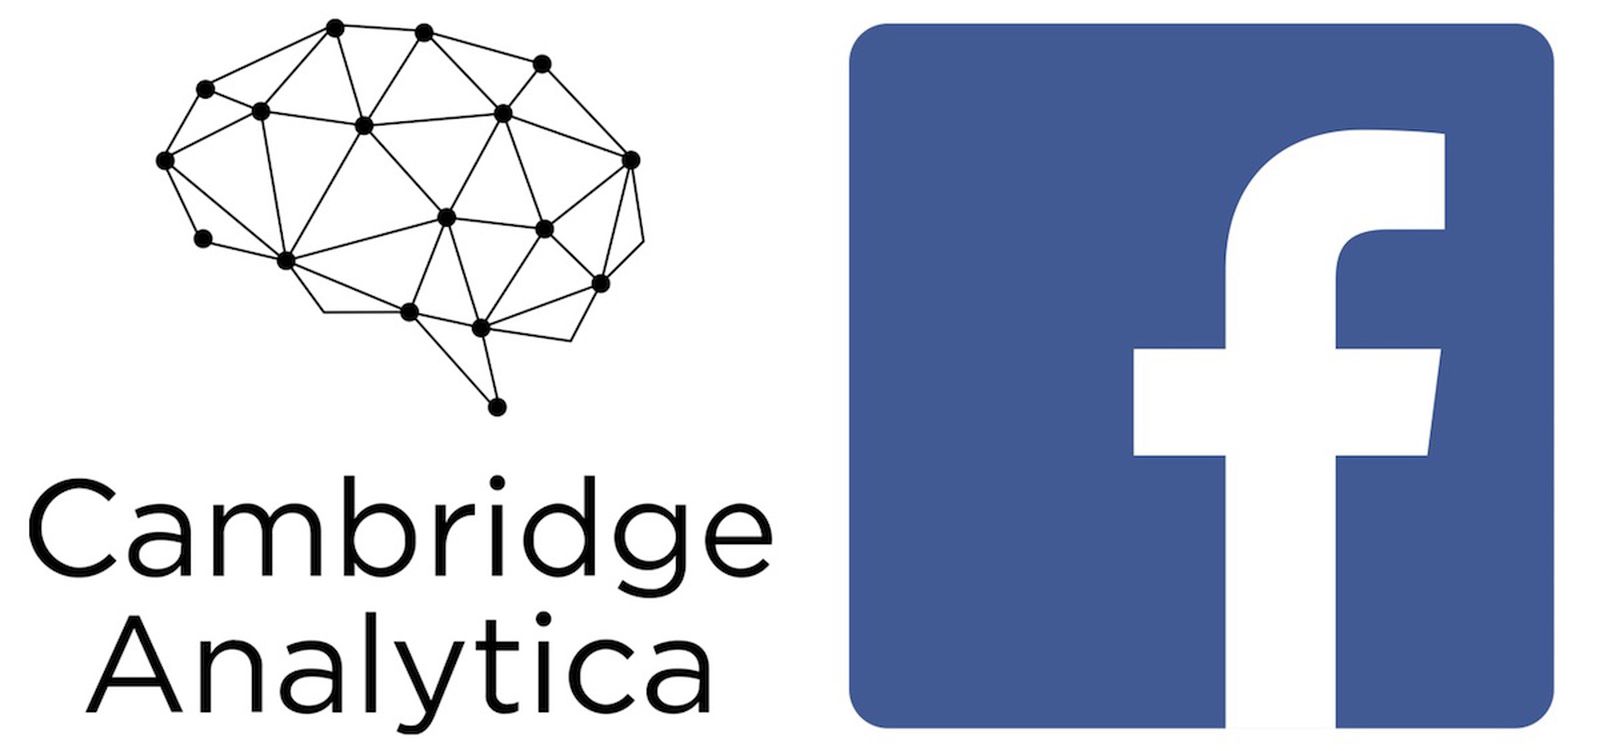 Cambridge Analytica and Facebook: The Scandal and the Fallout So